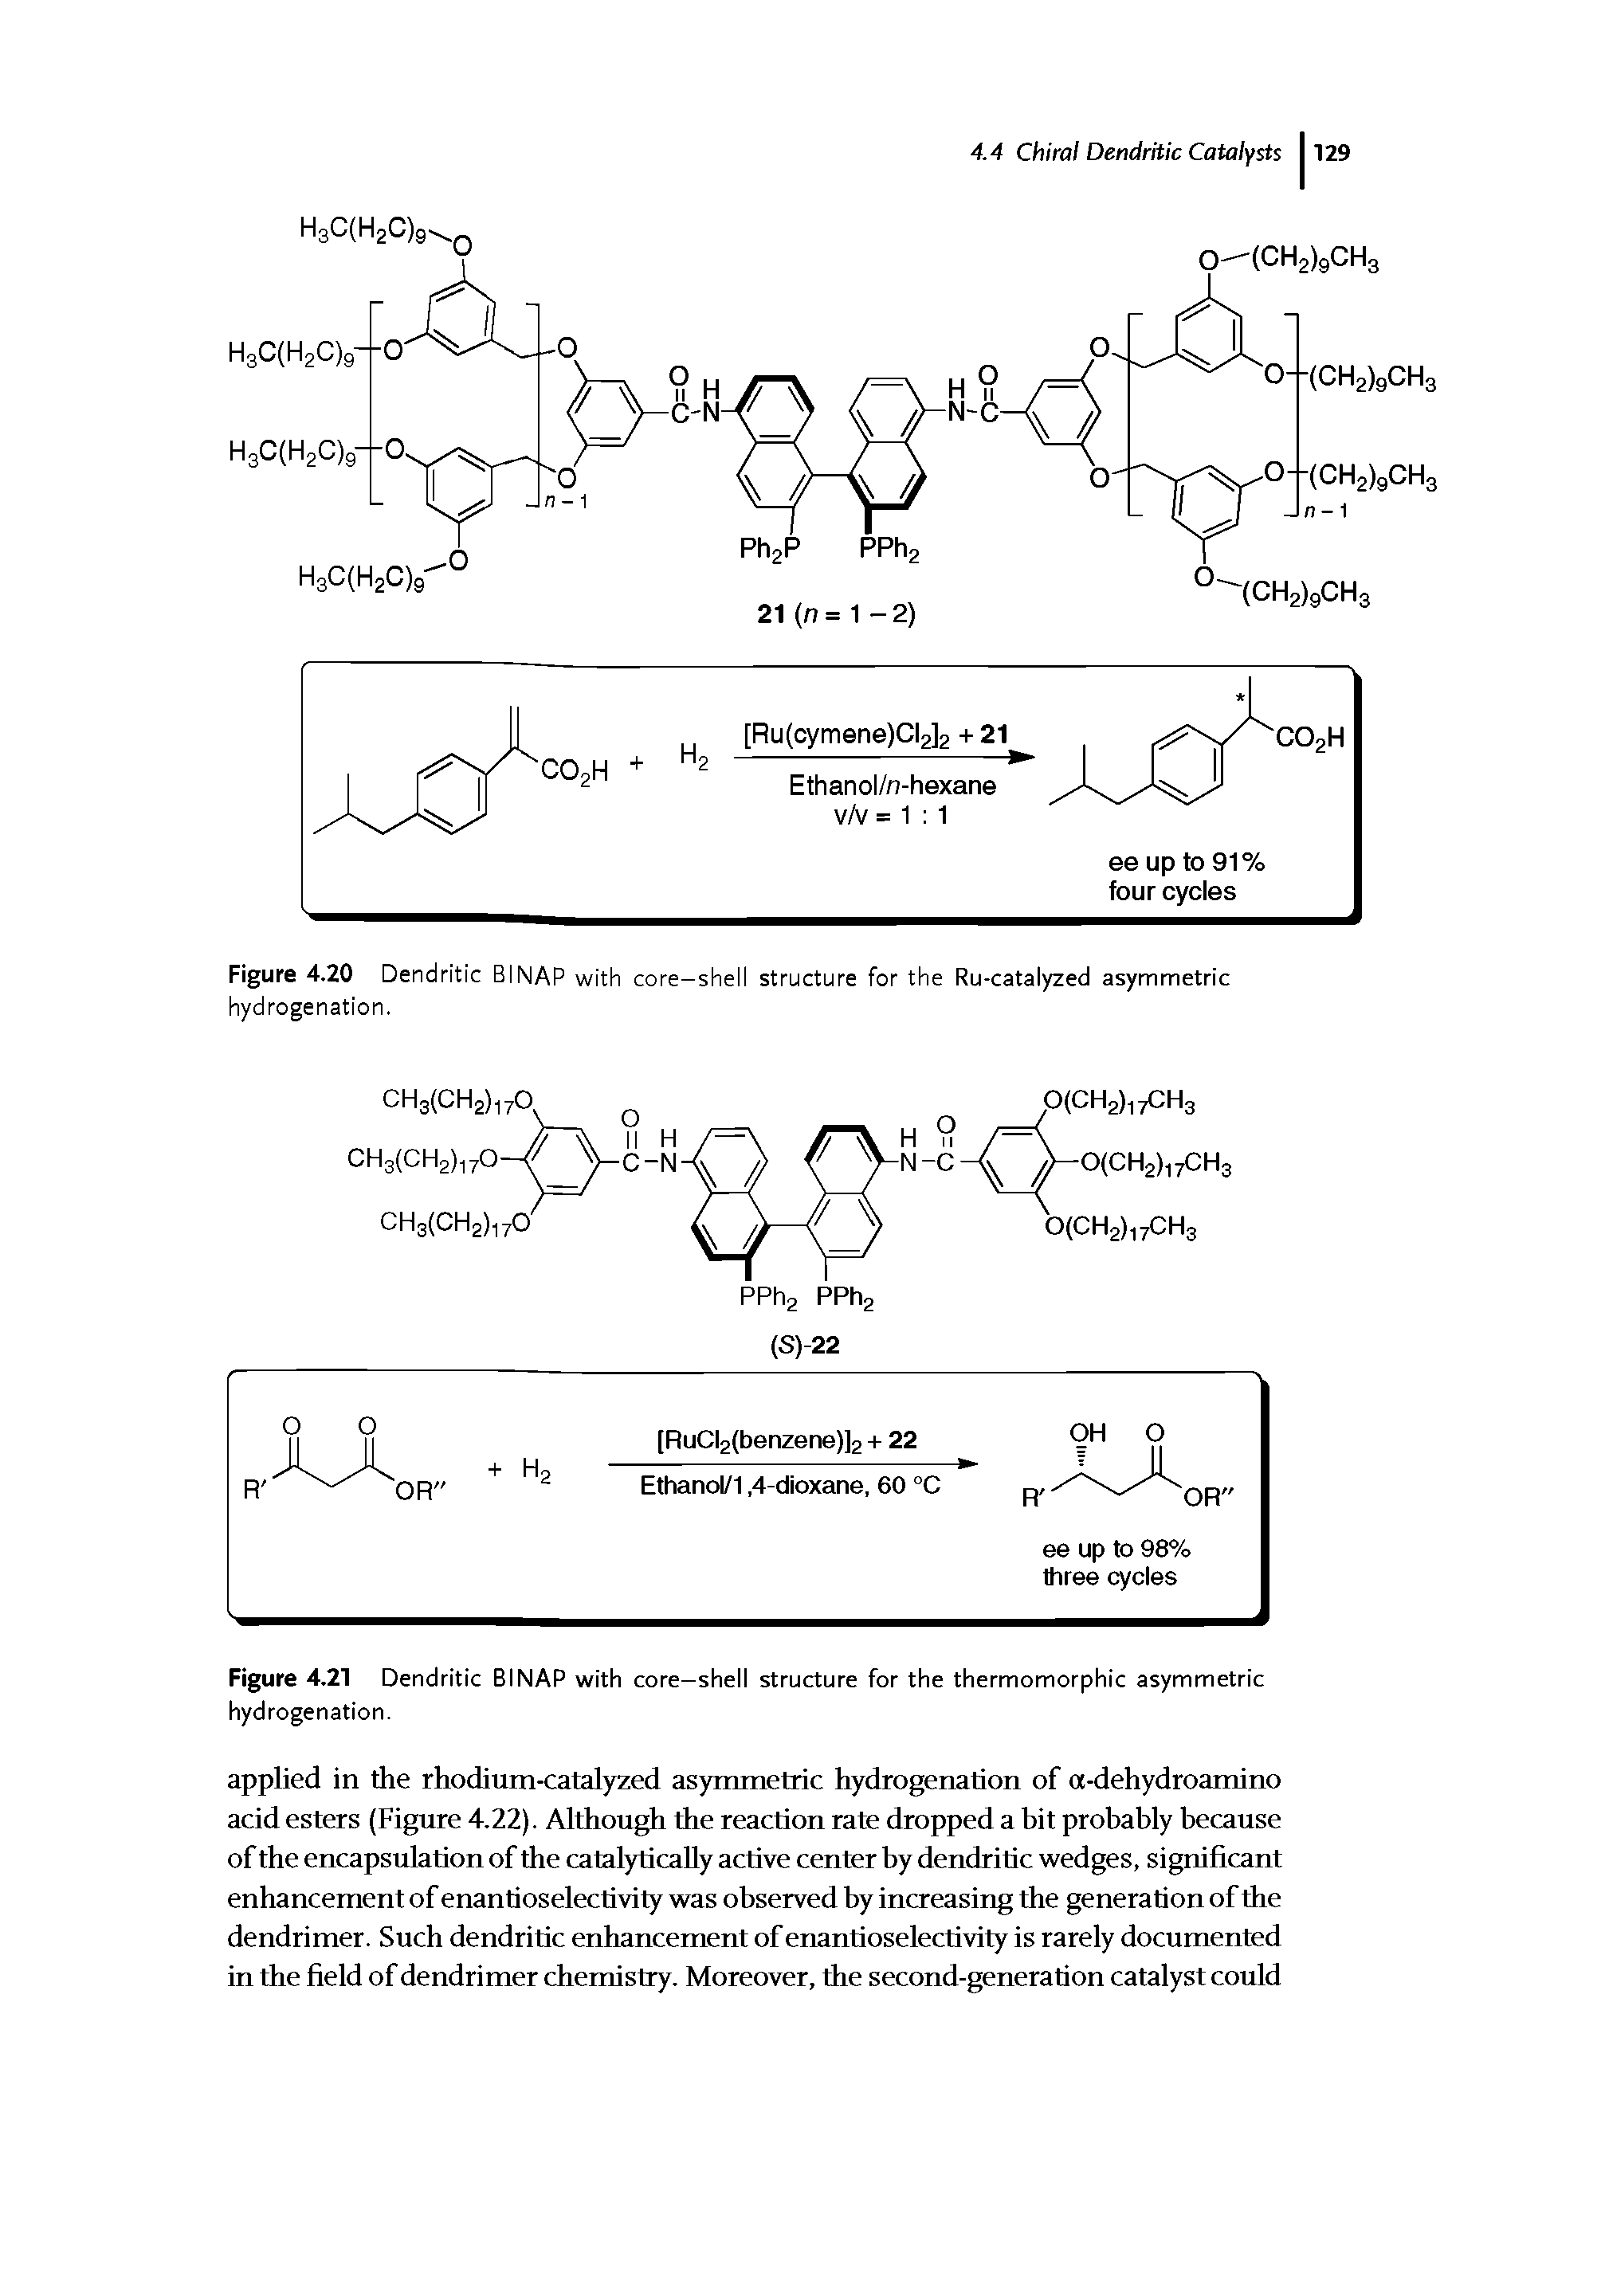 Figure 4.20 Dendritic BiNAP with core—shell structure for the Ru-catalyzed asymmetric hydrogenation.